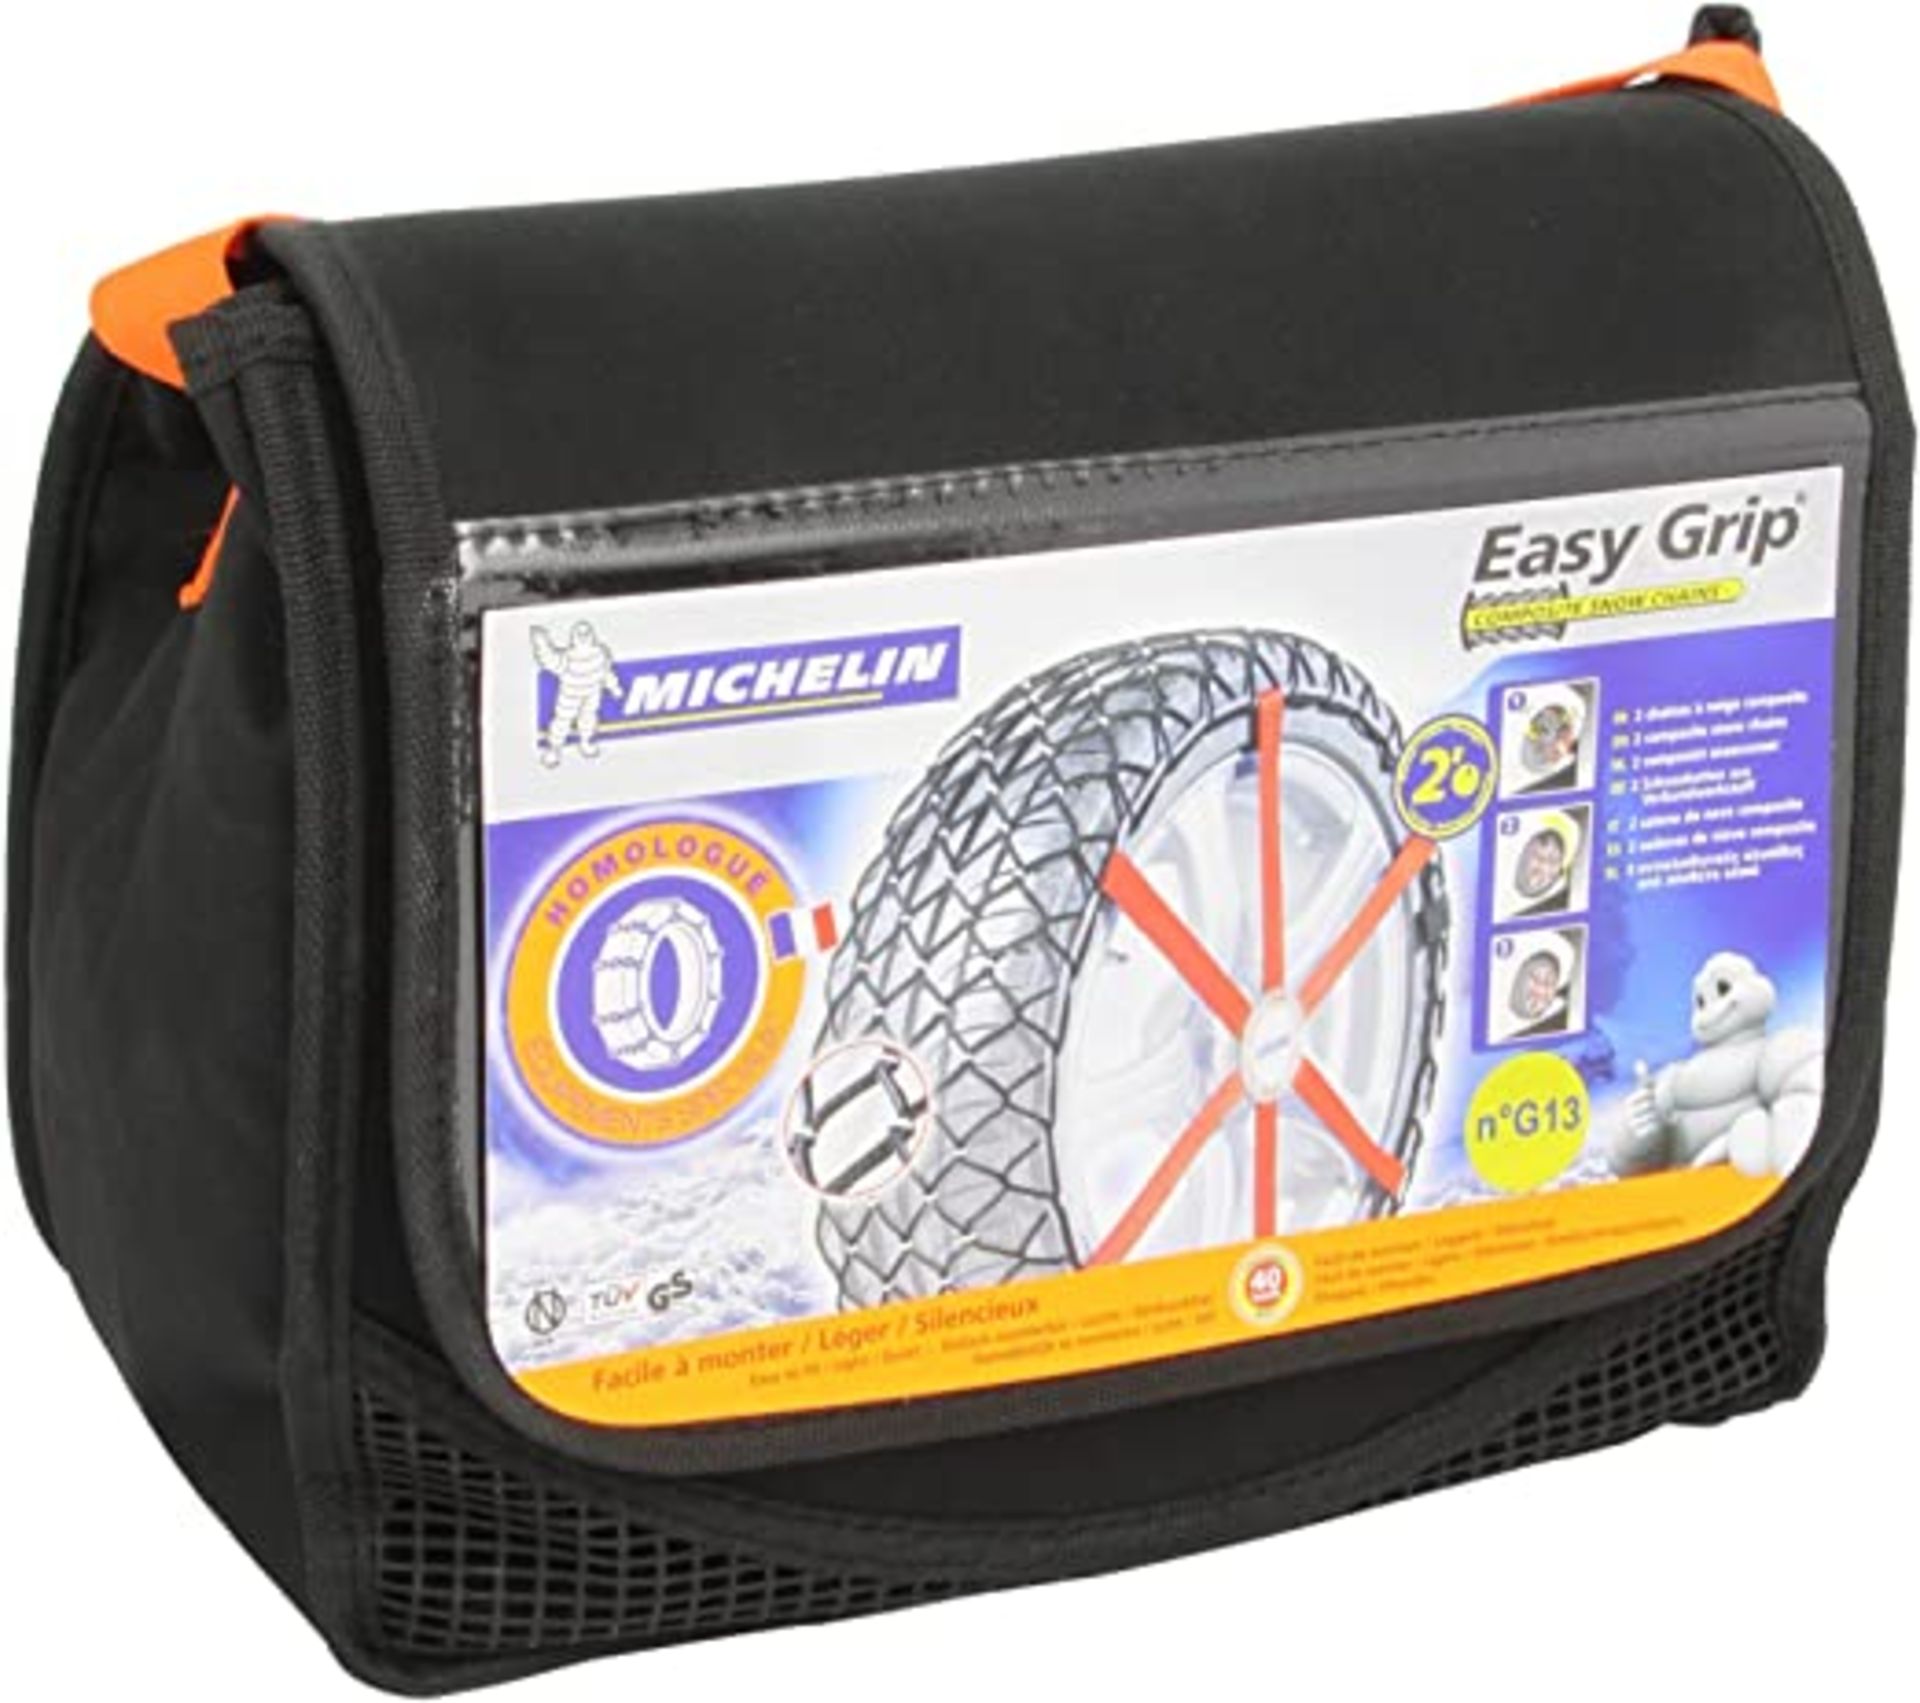 5 X NEW PACKAGED SETS OF Michelin Snow Sock Easy Grip G13. RRP £79.95 EACH. The Michelin Easy Grip